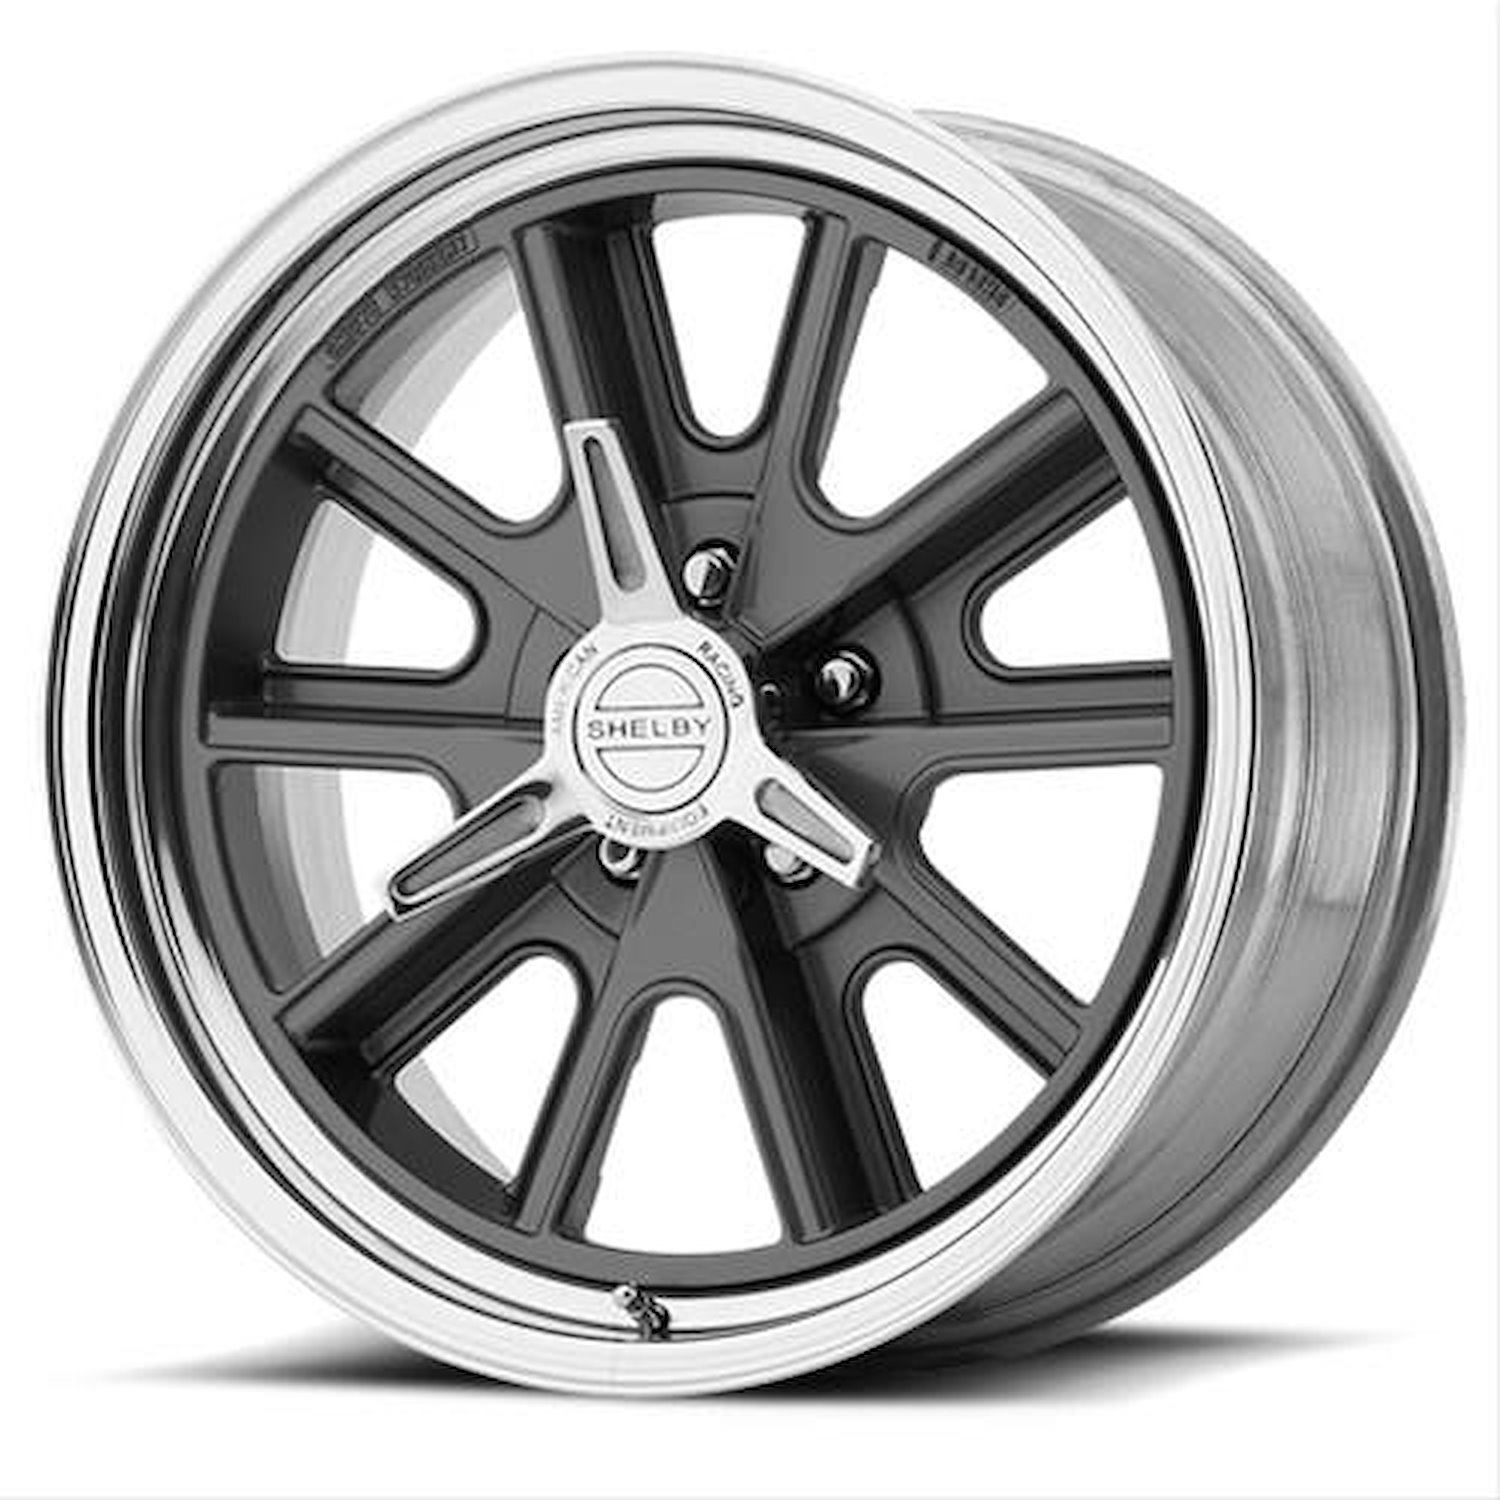 AMERICAN RACING 427 SHELBY COBRA TWO-PIECE MAG GRAY CENTER POLISHED BARREL 17 x 11 5X4.75 -6 5.76